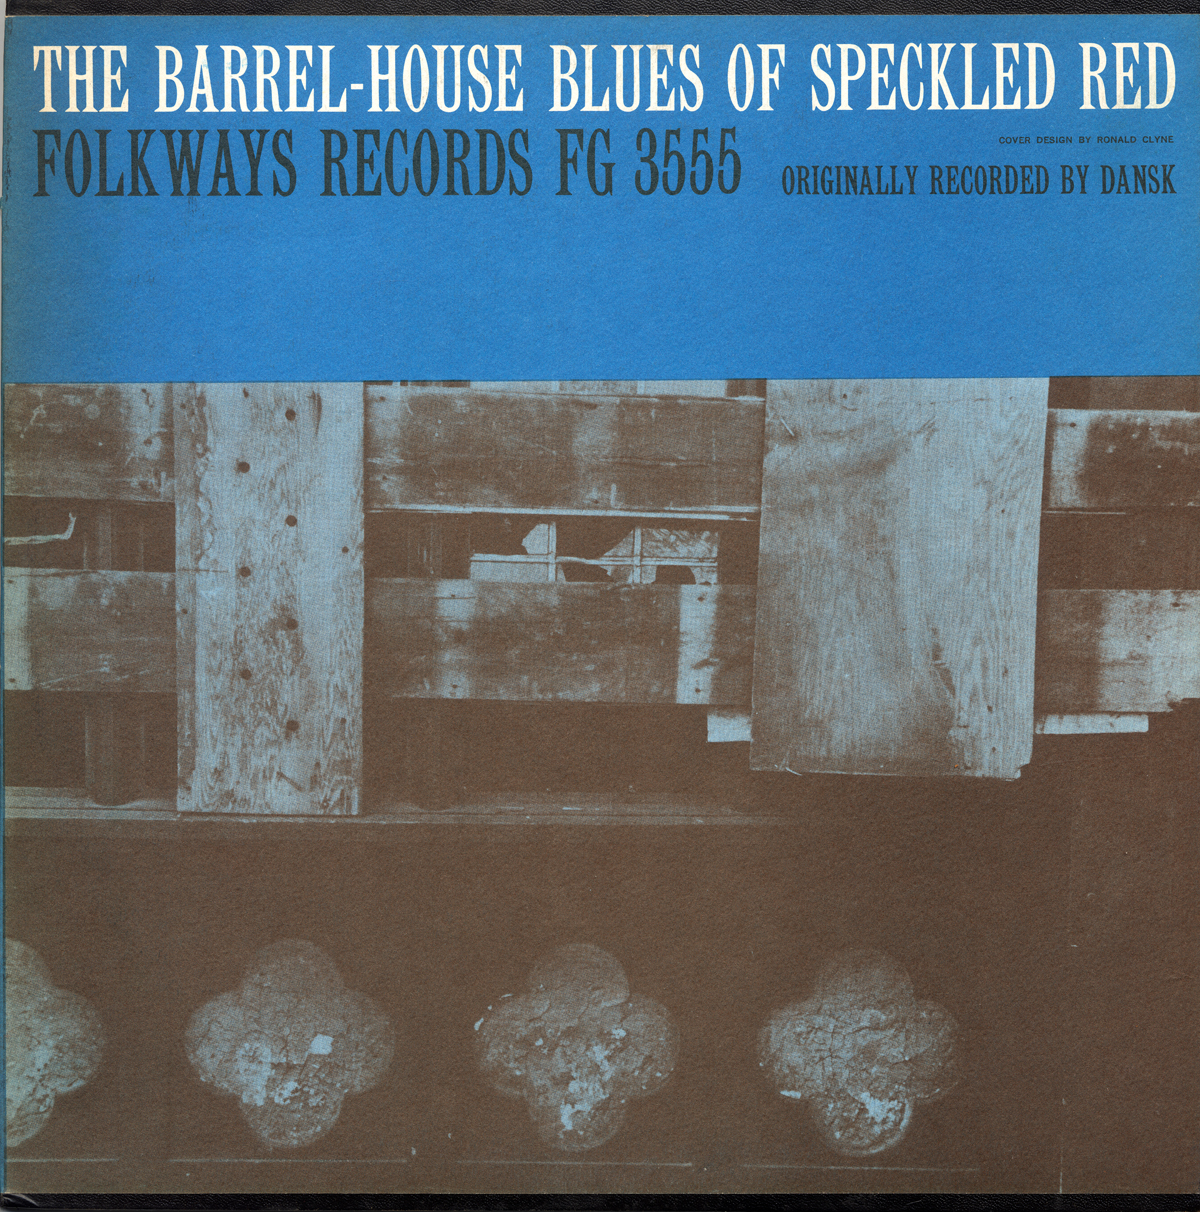 THE BARREL-HOUSE BLUES OF SPECKLED RED